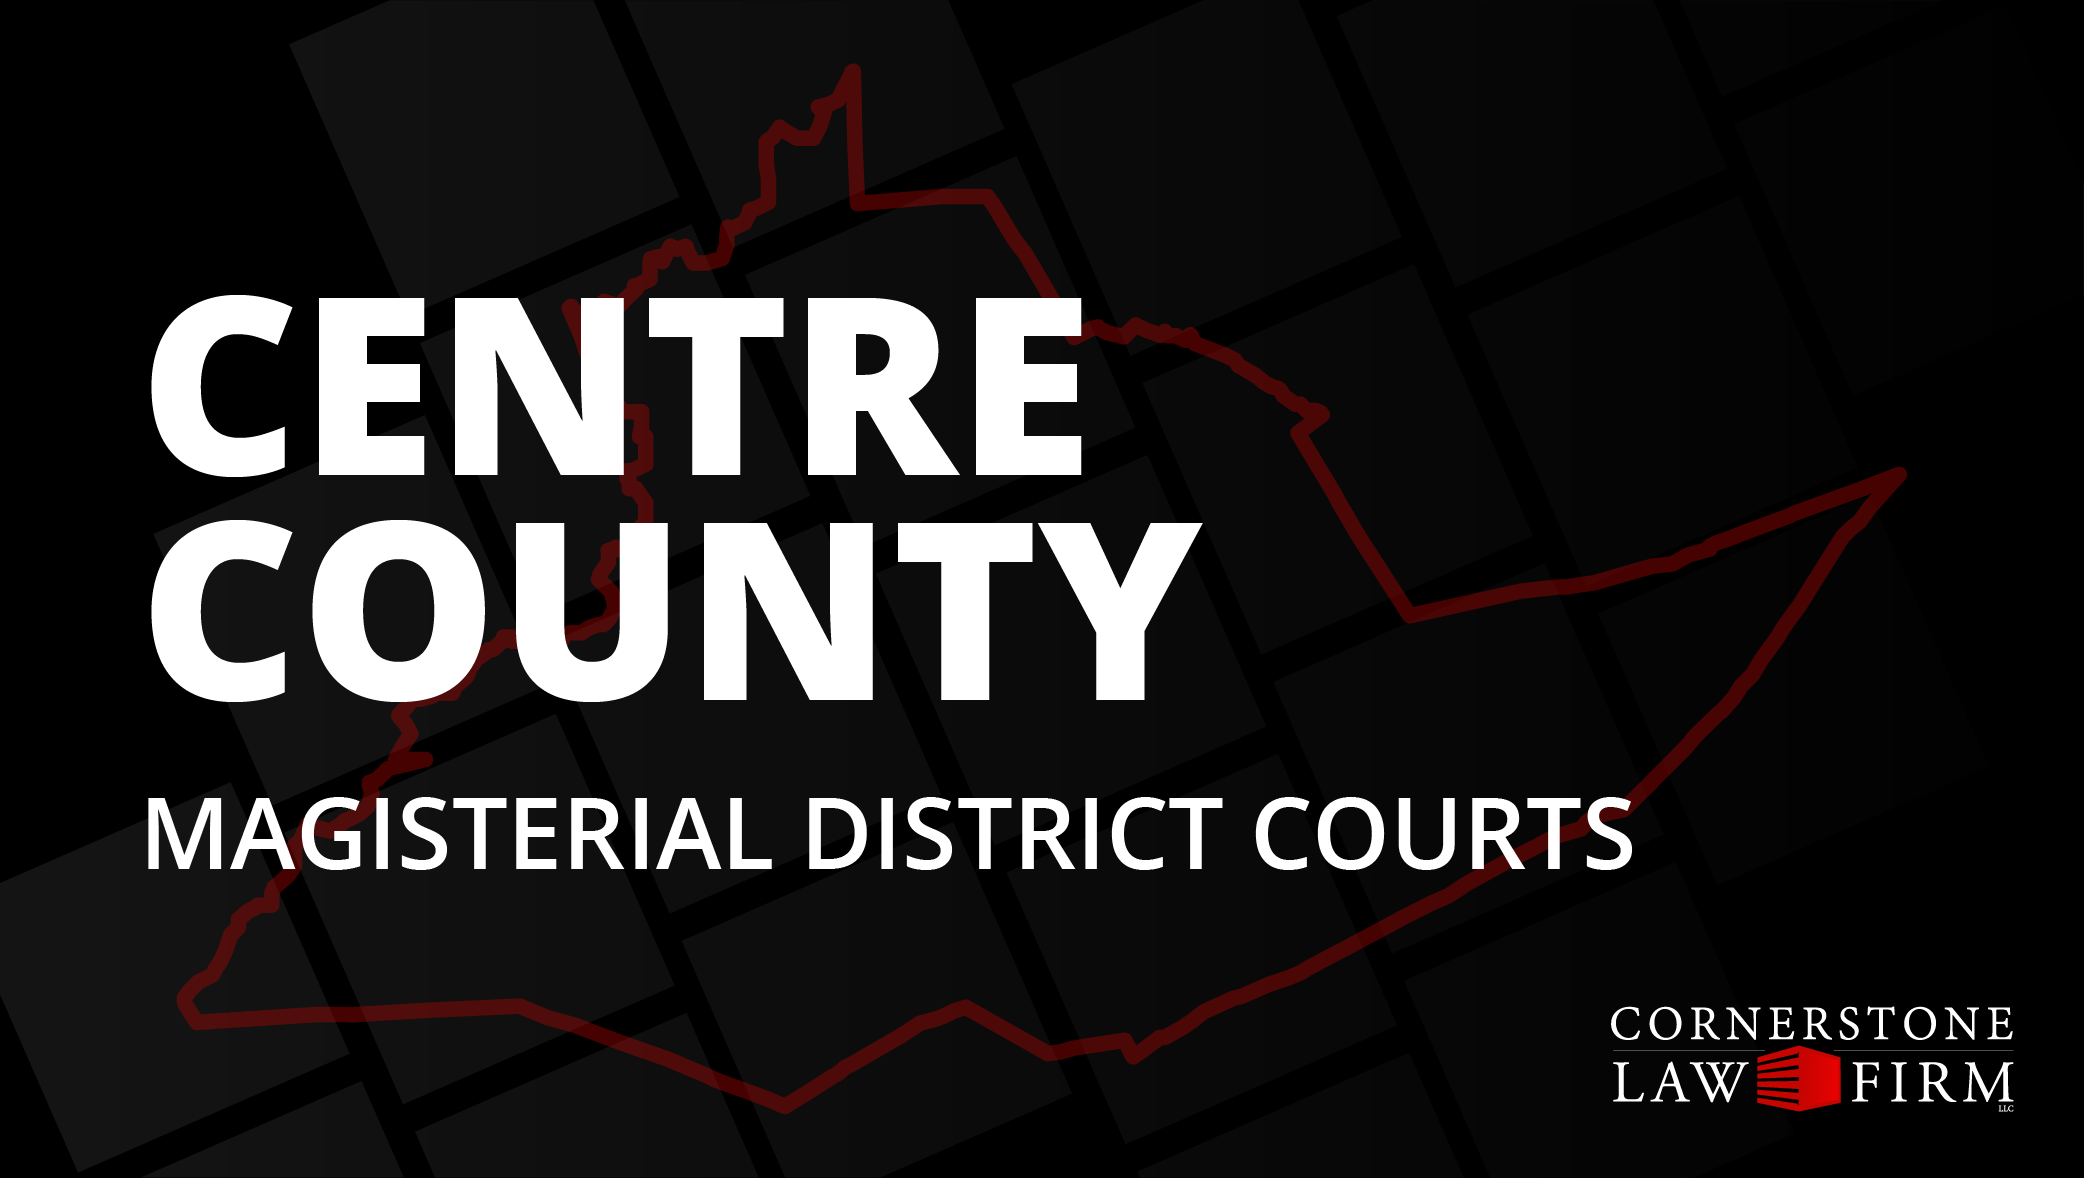 The words "Centre County Magisterial District Courts" over a black background with a faded red outline of the county.